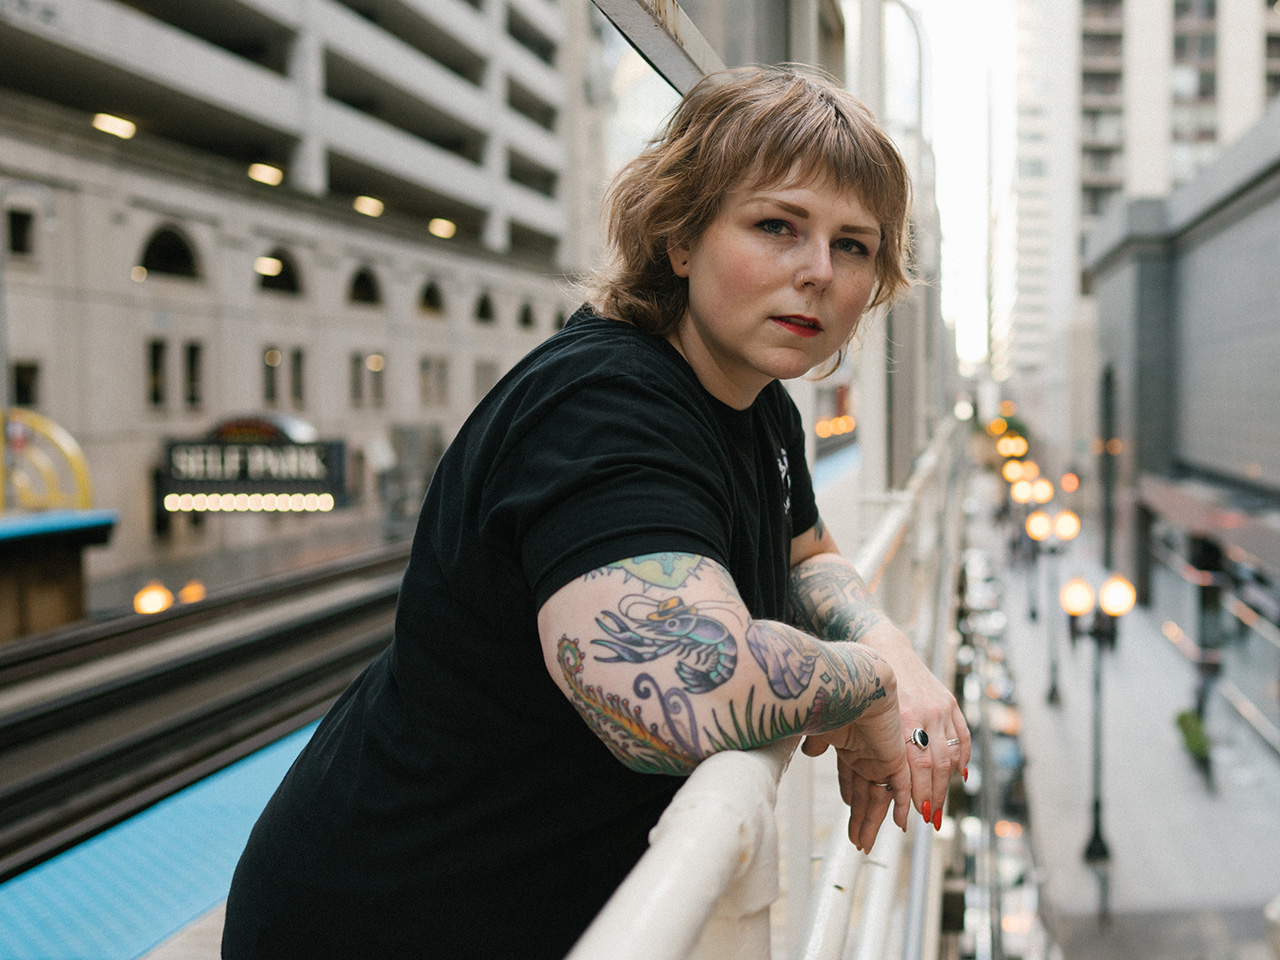 Author Tracey Lindeman leans against a railing in a city, looking at the camera. Lindeman suffered with endometriosis for decades before having a hystectomy.